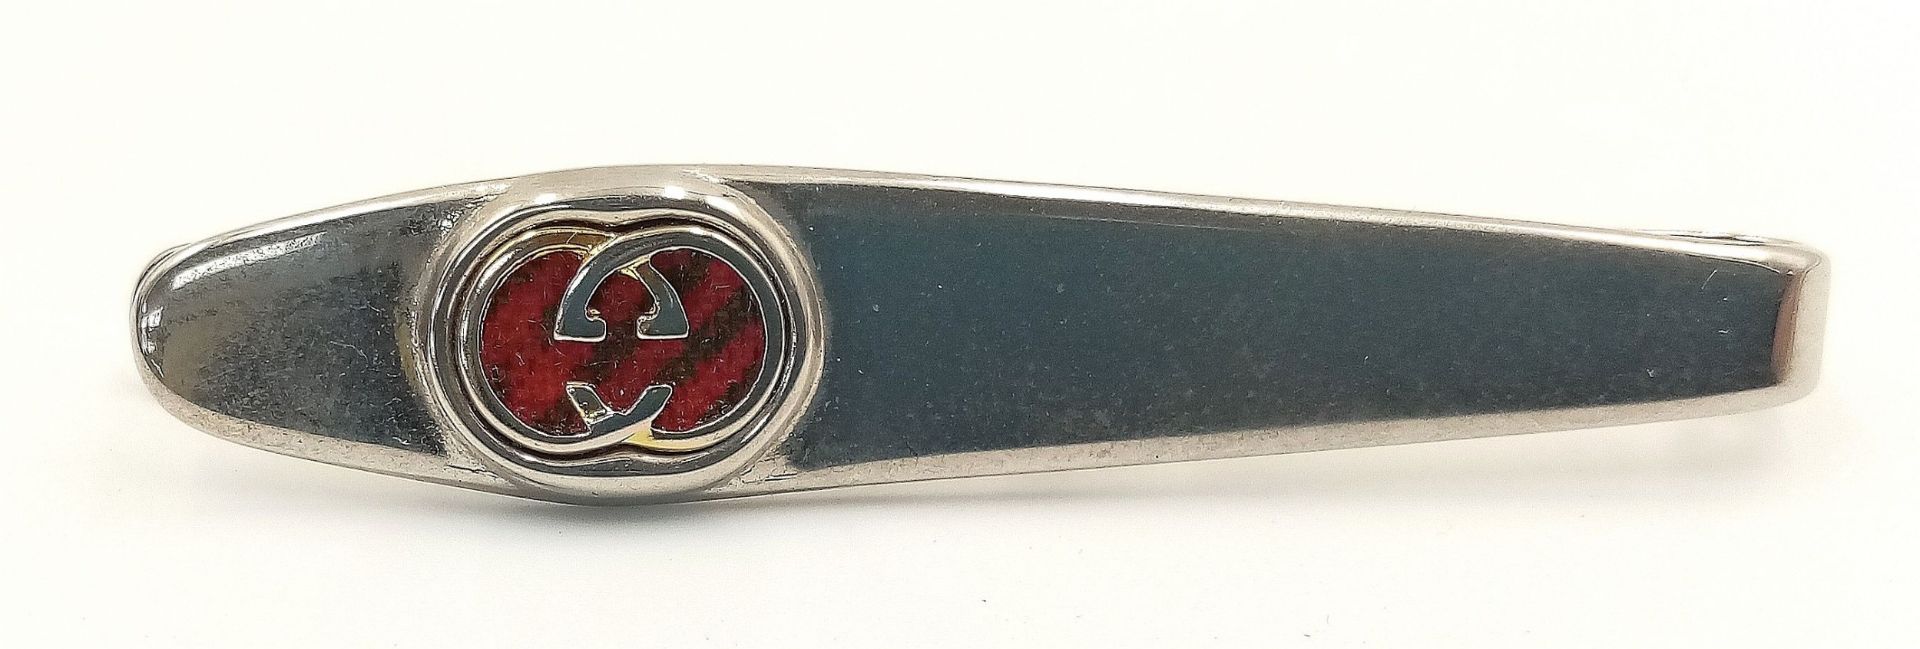 A Gucci Silver Tone Tie Clip. Comes with original packaging. Ref: 016977 - Image 2 of 6